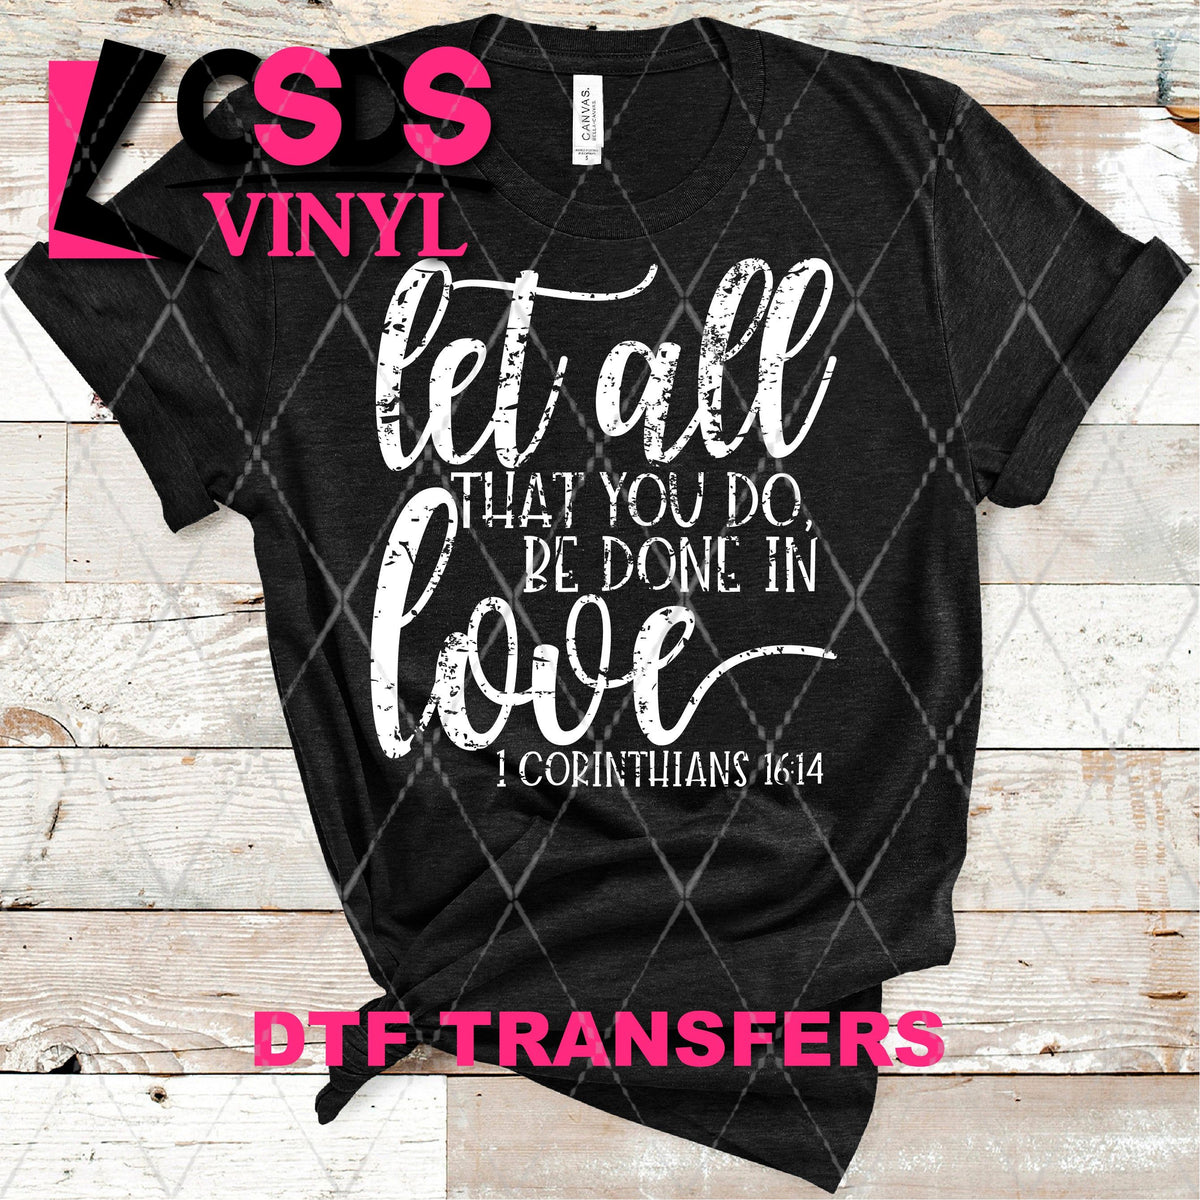 Shirts made with Heat Transfer Vinyl vs. DTF Transfers {HTV vs. DTF} -  Keeping it Simple